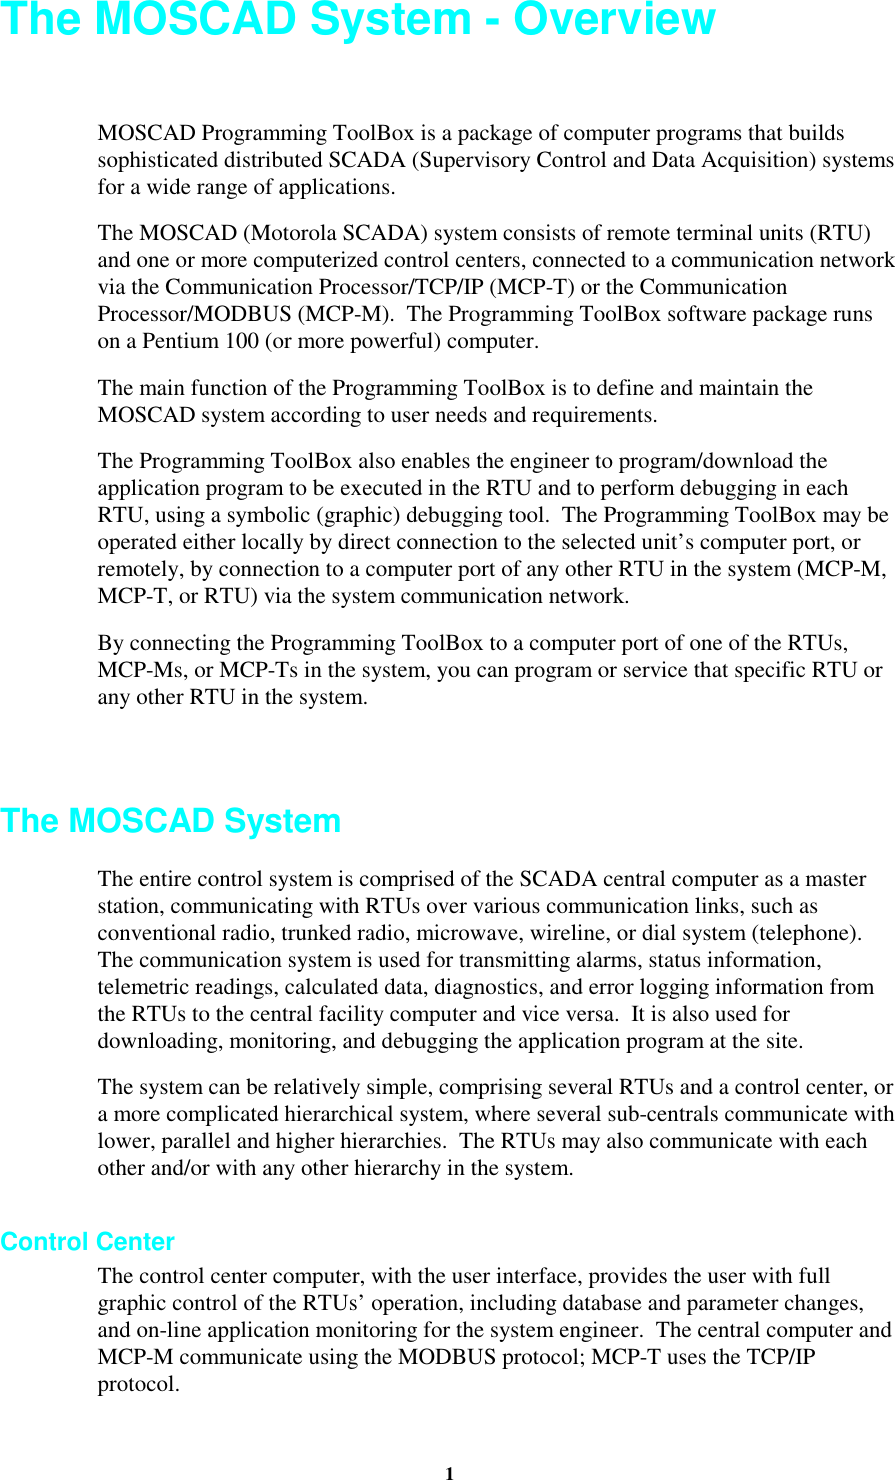 1The MOSCAD System - OverviewMOSCAD Programming ToolBox is a package of computer programs that buildssophisticated distributed SCADA (Supervisory Control and Data Acquisition) systemsfor a wide range of applications.The MOSCAD (Motorola SCADA) system consists of remote terminal units (RTU)and one or more computerized control centers, connected to a communication networkvia the Communication Processor/TCP/IP (MCP-T) or the CommunicationProcessor/MODBUS (MCP-M). The Programming ToolBox software package runson a Pentium 100 (or more powerful) computer.The main function of the Programming ToolBox is to define and maintain theMOSCAD system according to user needs and requirements.The Programming ToolBox also enables the engineer to program/download theapplication program to be executed in the RTU and to perform debugging in eachRTU, using a symbolic (graphic) debugging tool. The Programming ToolBox may beoperated either locally by direct connection to the selected unit’s computer port, orremotely, by connection to a computer port of any other RTU in the system (MCP-M,MCP-T, or RTU) via the system communication network.By connecting the Programming ToolBox to a computer port of one of the RTUs,MCP-Ms, or MCP-Ts in the system, you can program or service that specific RTU orany other RTU in the system.The MOSCAD SystemThe entire control system is comprised of the SCADA central computer as a masterstation, communicating with RTUs over various communication links, such asconventional radio, trunked radio, microwave, wireline, or dial system (telephone).The communication system is used for transmitting alarms, status information,telemetric readings, calculated data, diagnostics, and error logging information fromthe RTUs to the central facility computer and vice versa. It is also used fordownloading, monitoring, and debugging the application program at the site.The system can be relatively simple, comprising several RTUs and a control center, ora more complicated hierarchical system, where several sub-centrals communicate withlower, parallel and higher hierarchies. The RTUs may also communicate with eachother and/or with any other hierarchy in the system.Control CenterThe control center computer, with the user interface, provides the user with fullgraphic control of the RTUs’ operation, including database and parameter changes,and on-line application monitoring for the system engineer. The central computer andMCP-M communicate using the MODBUS protocol; MCP-T uses the TCP/IPprotocol.